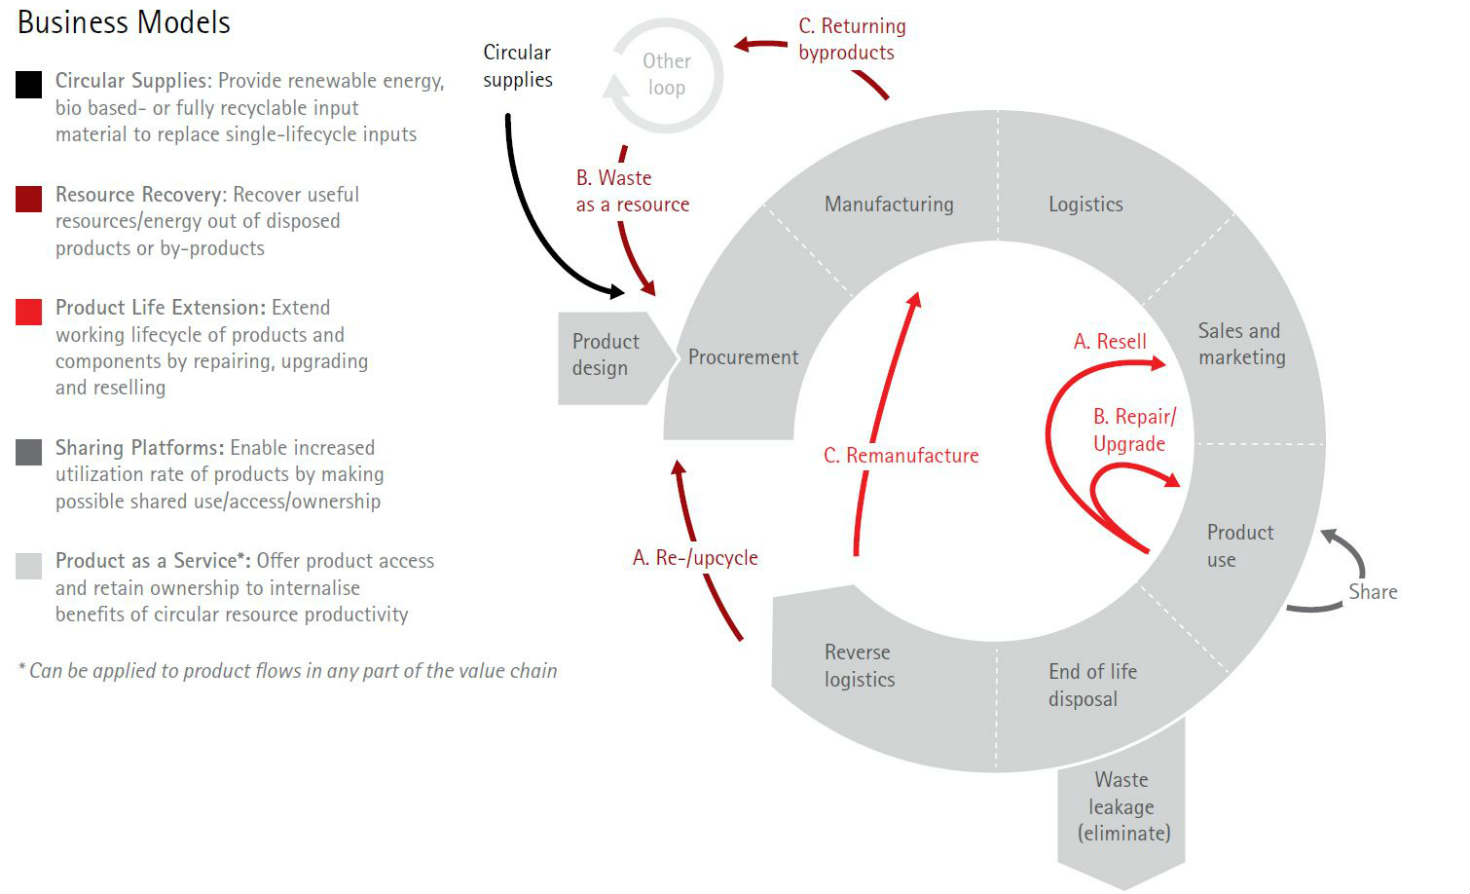 5 circular business models from Accenture